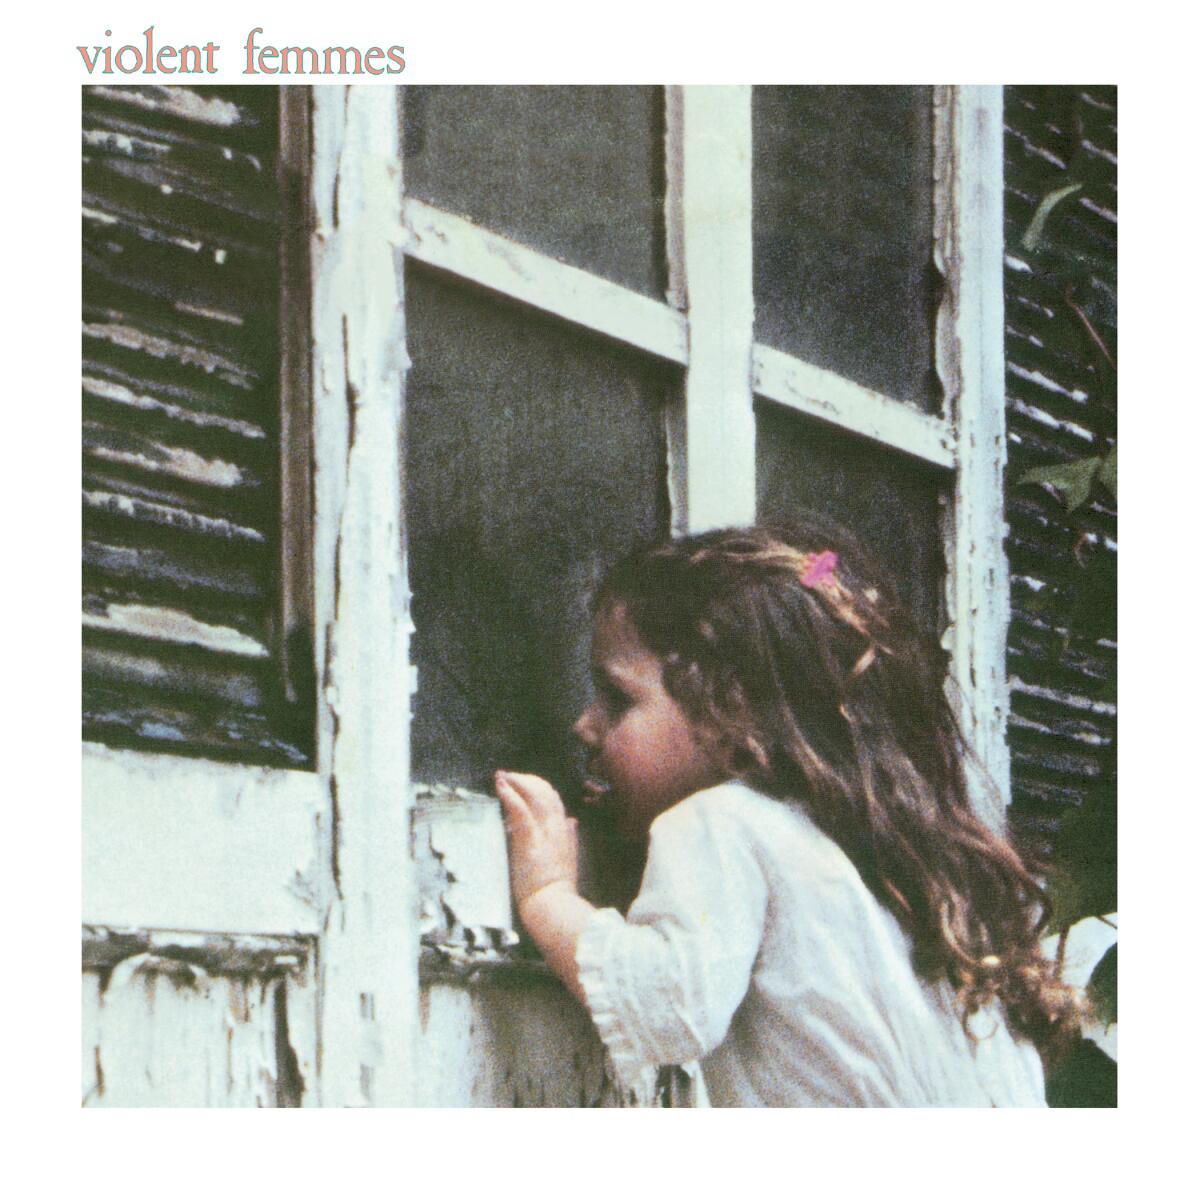 This cover image released by Craft Recording shows the 40th anniversary deluxe edition of the band's self-titled debut album by Violent Femmes. (Craft Recording via AP)